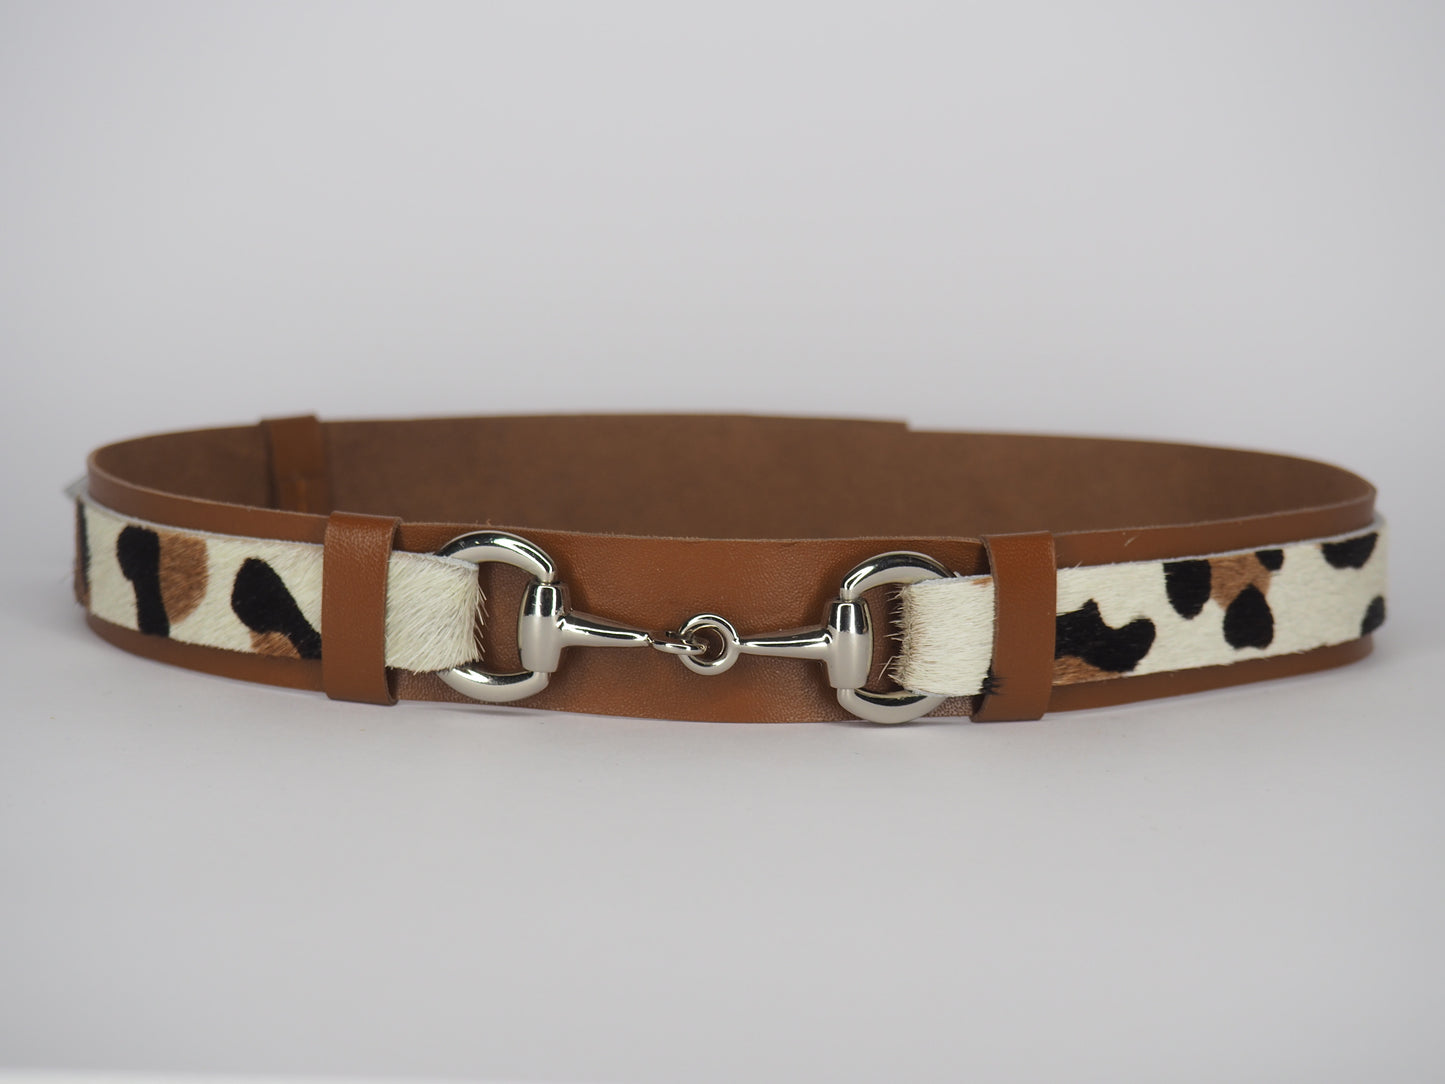 Adjustable Tan Leather Hat Band -Snow Leopard Print with Silver Horse Bit Hardware